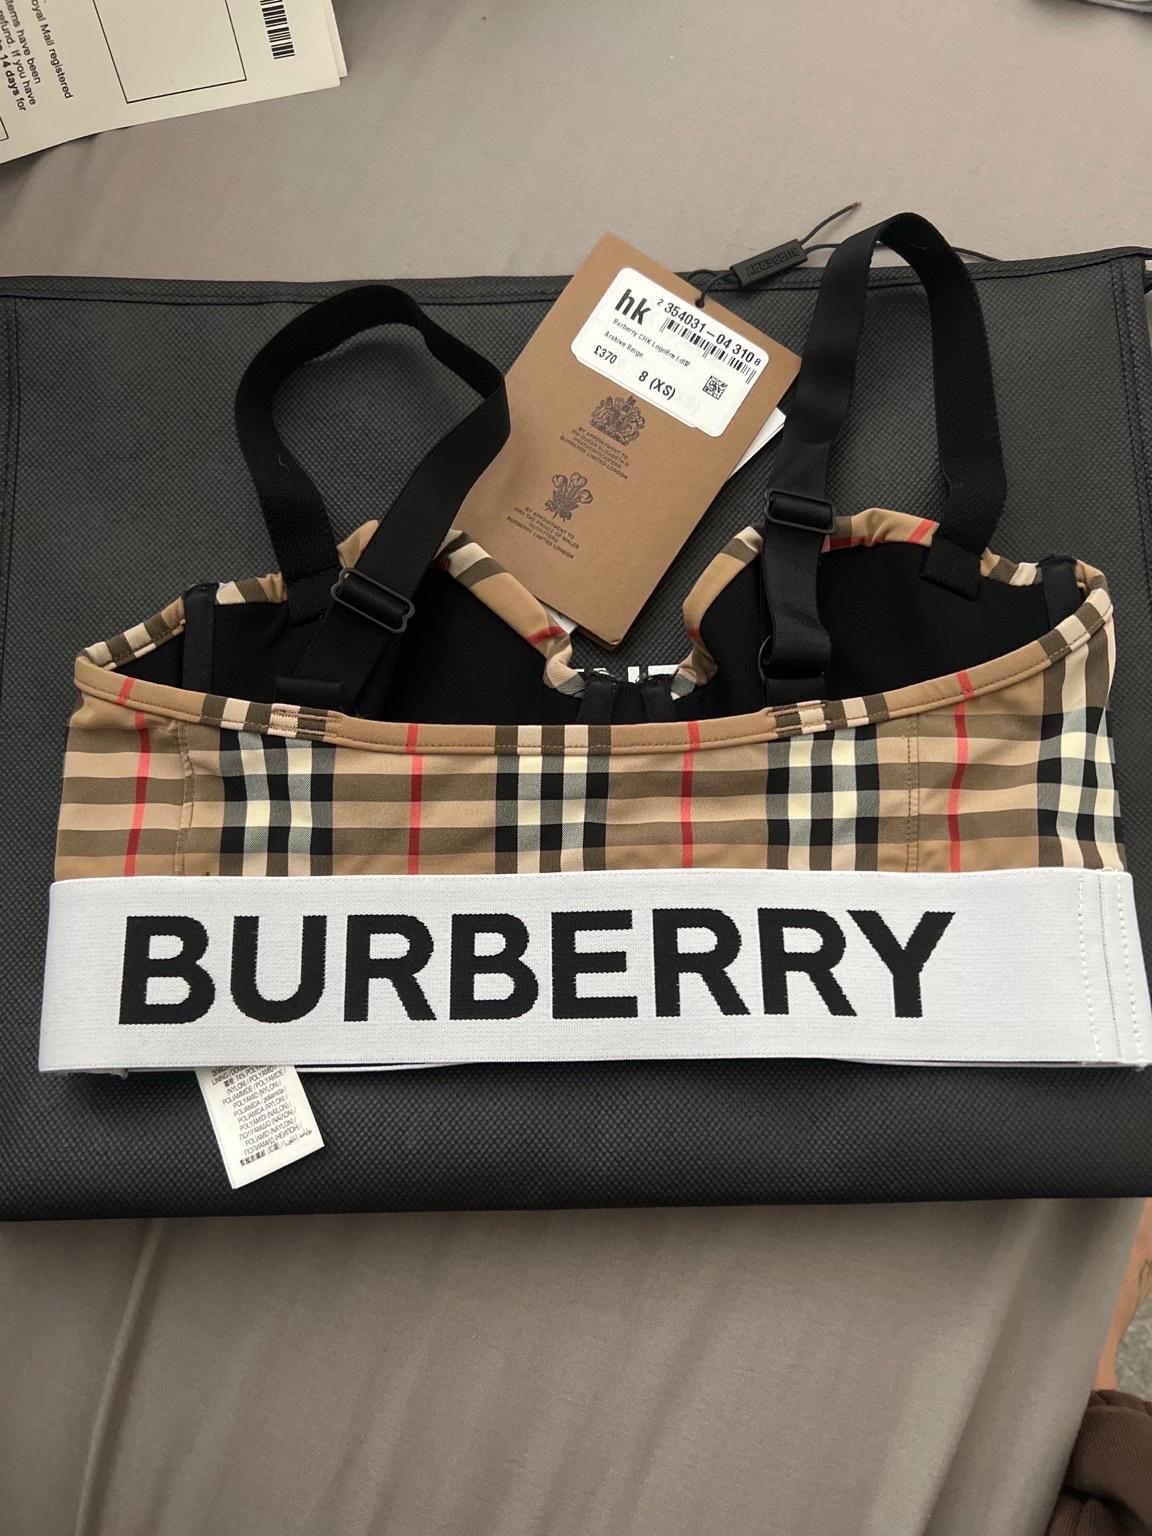 Burberry logo bra in LS18 Leeds for £300.00 for sale | Shpock